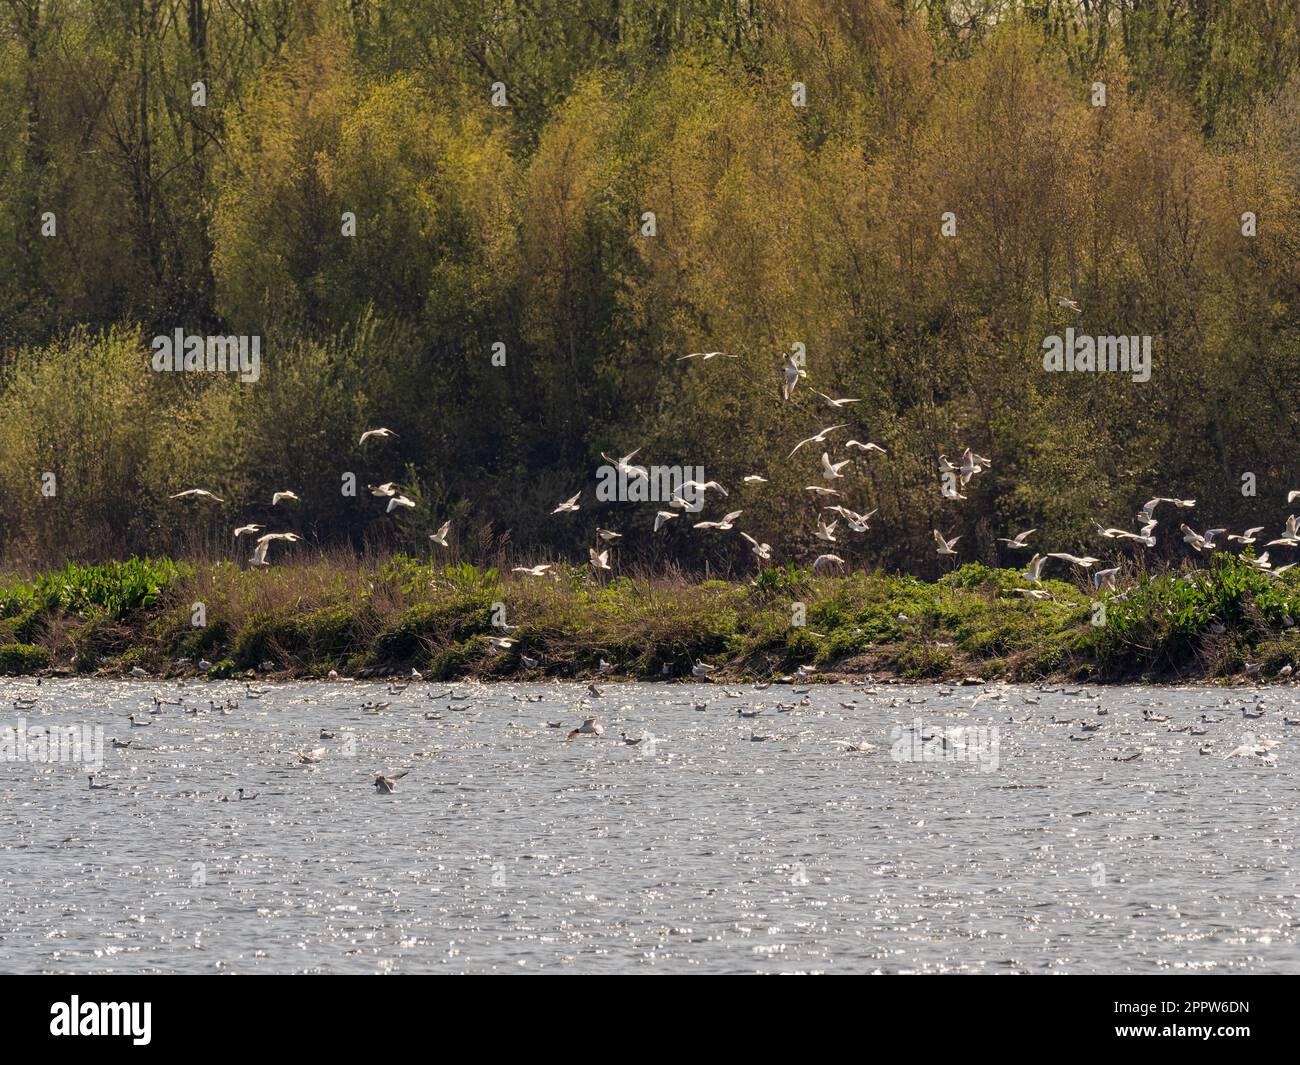 Flock of Black-headed gulls at St Aidan's Park nature reserve in Spring. Leeds. Stock Photo